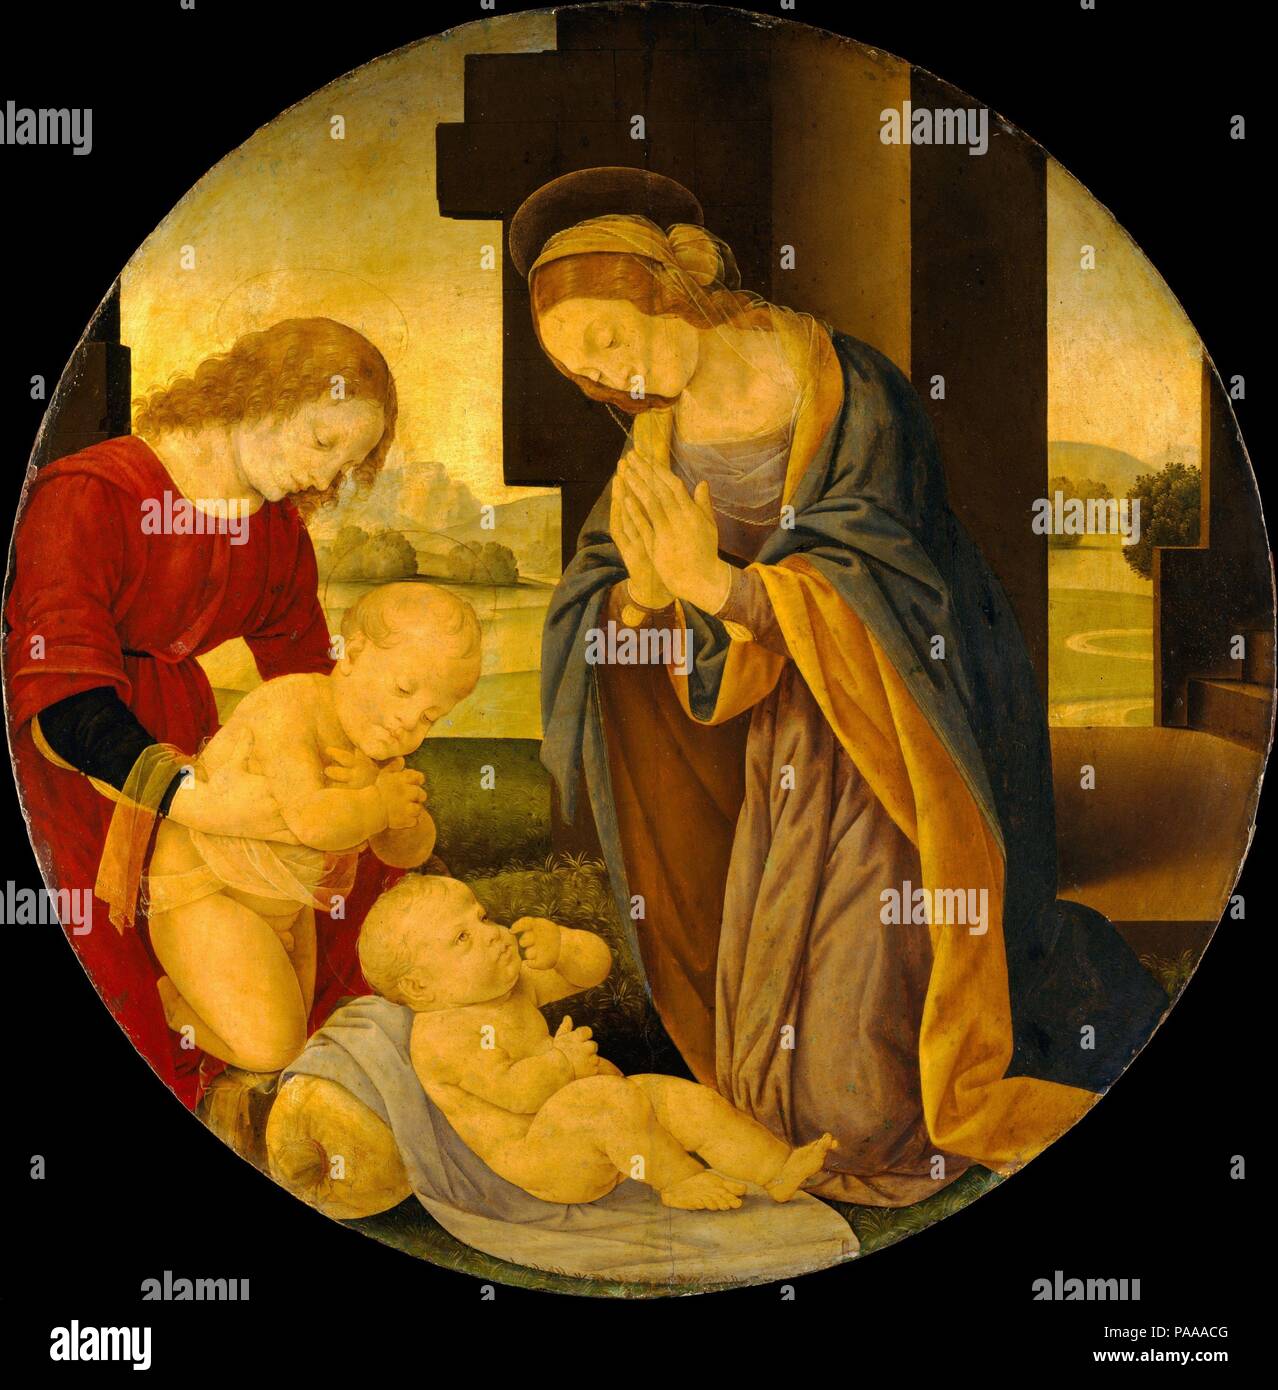 Madonna Adoring the Child with the Infant Saint John the Baptist and an Angel. Artist: Lorenzo di Credi (Lorenzo d'Andrea d'Oderigo) (Italian, Florence 1456/59-1536 Florence). Dimensions: Diameter 36 in. (91.4 cm). Date: Early 1490s.  An angel introduces the infant John the Baptist--a patron saint of Florence--to his newborn cousin, Jesus, who is adored by his mother. The soft, diffused light--inspired by the work of the Netherlandish painter Hans Memling--creates a mood of 'gentle pietistic reverie' (the critic Roger Fry, writing in 1909).  Several workshop replicas of this important picture  Stock Photo